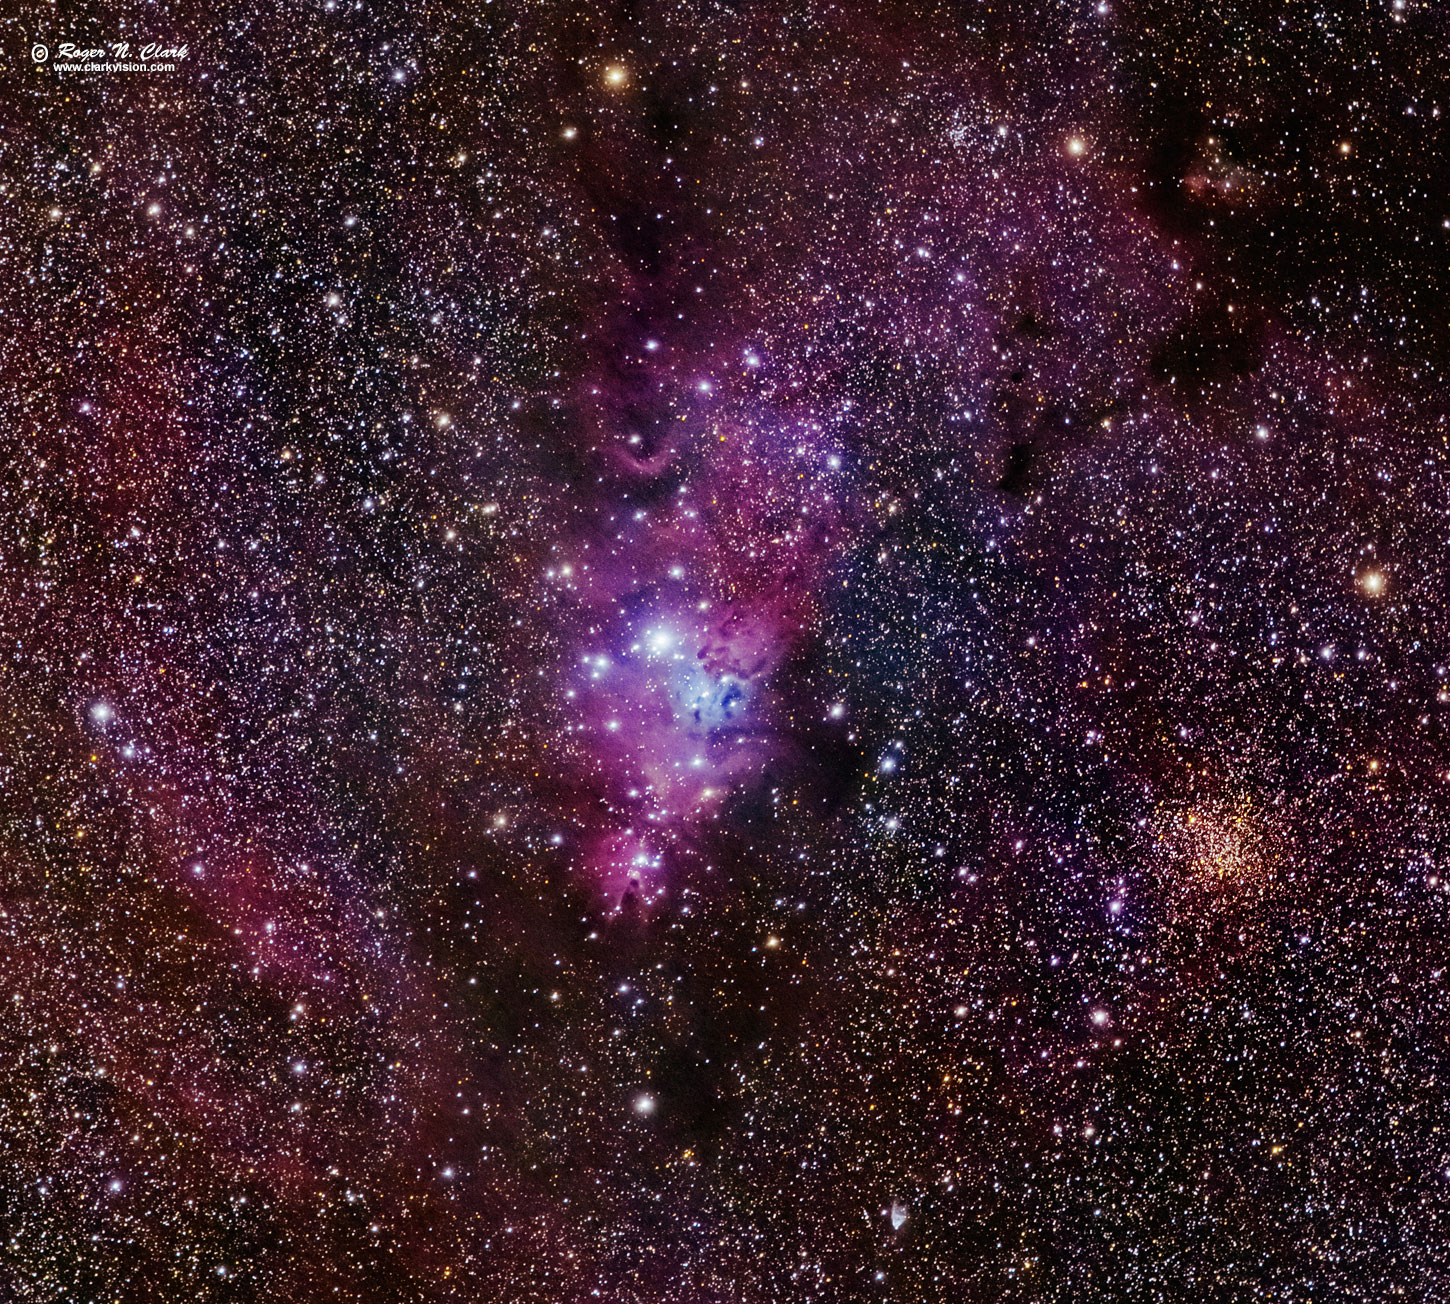 image cone-nebula.c02.02.2016.0j6a7418-75.t2-g-c1-1450s.jpg is Copyrighted by Roger N. Clark, www.clarkvision.com